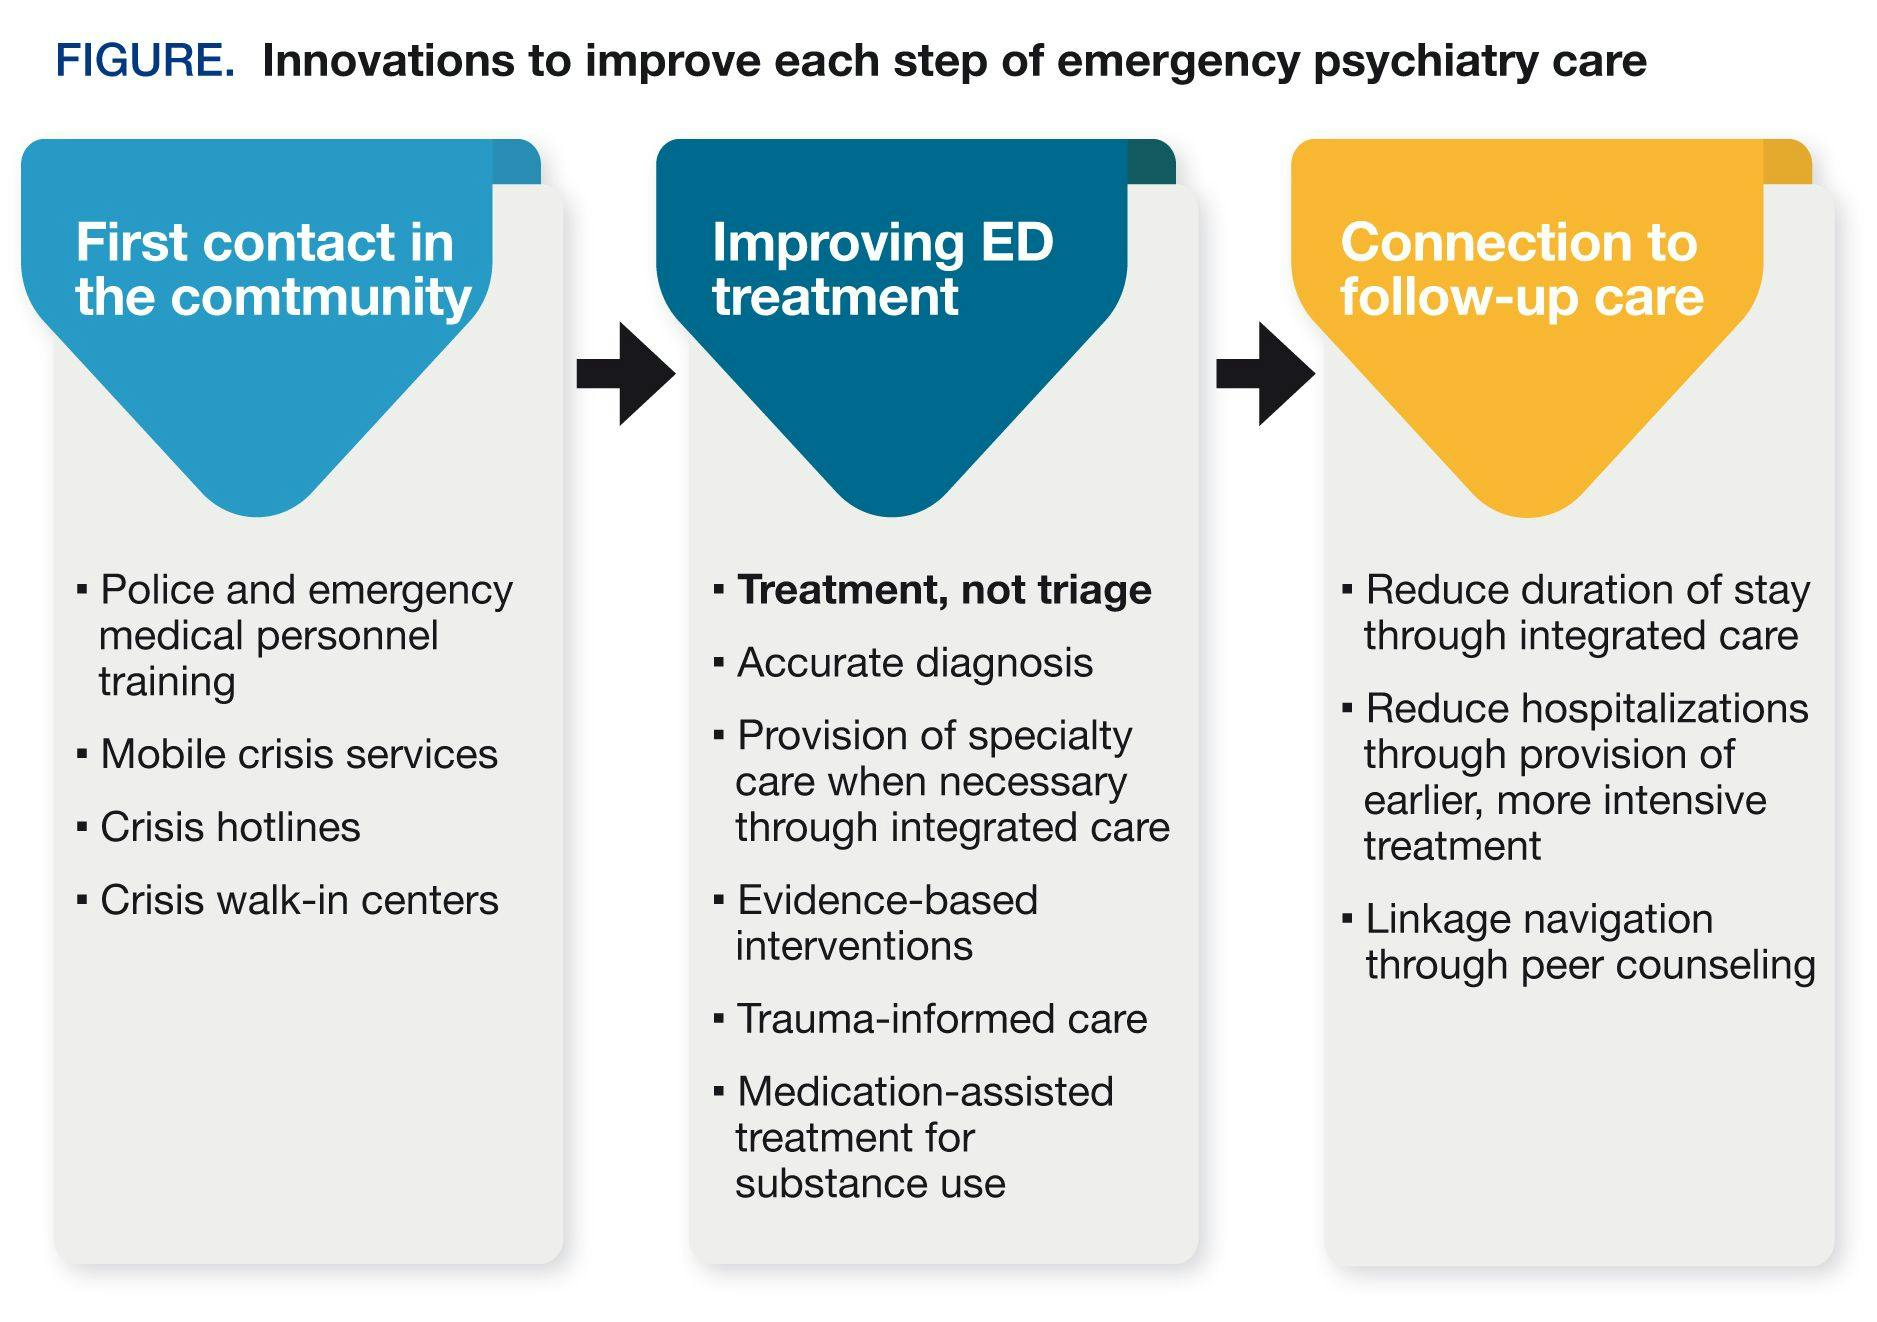 Innovations to improve each step of emergency psychiatry care